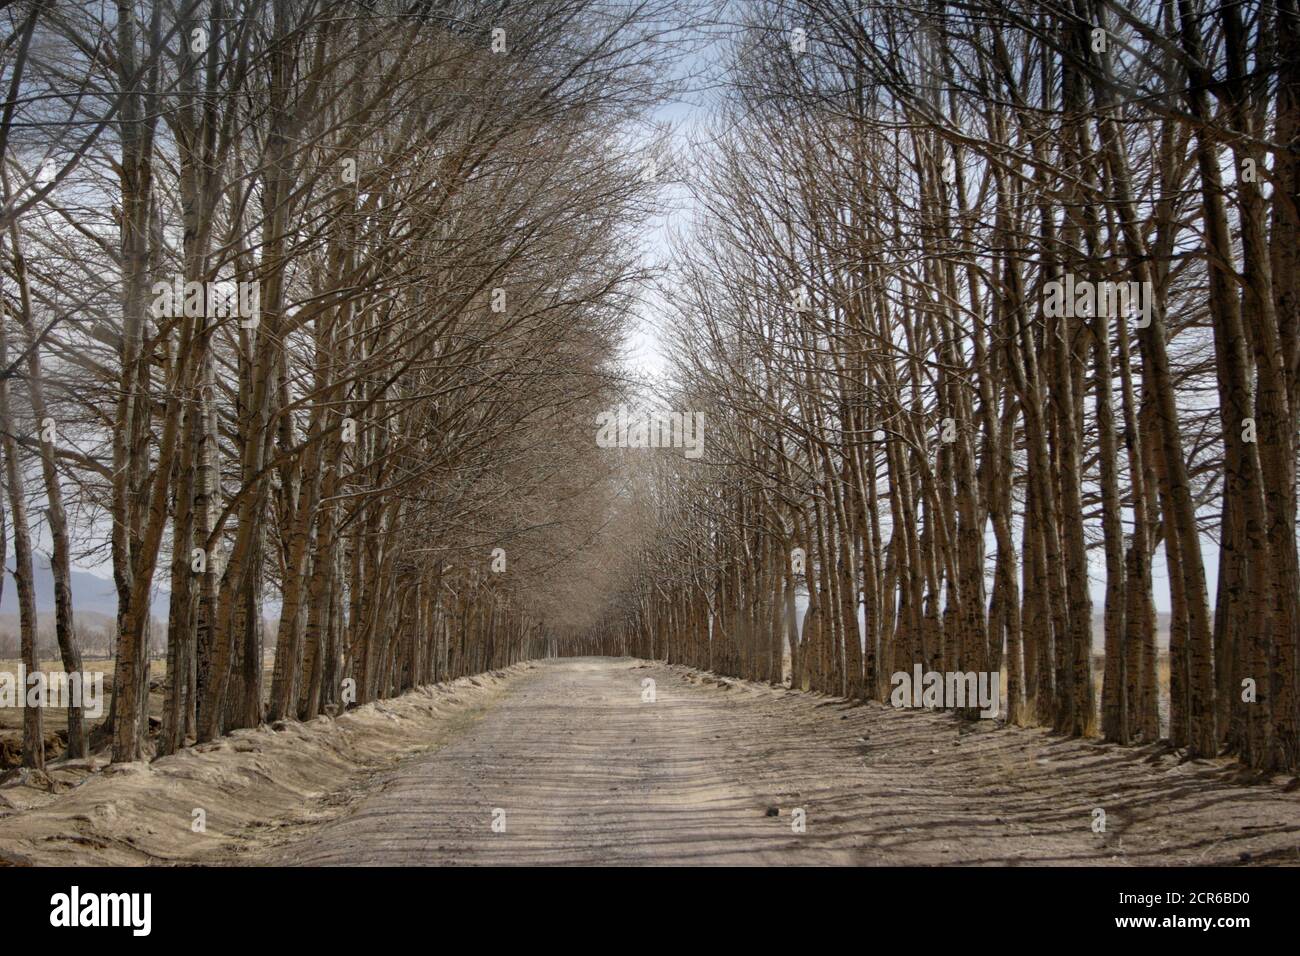 Dirt road lined with Poplars, Heimahe, Qinghai Province, China 29th April 2005 Stock Photo